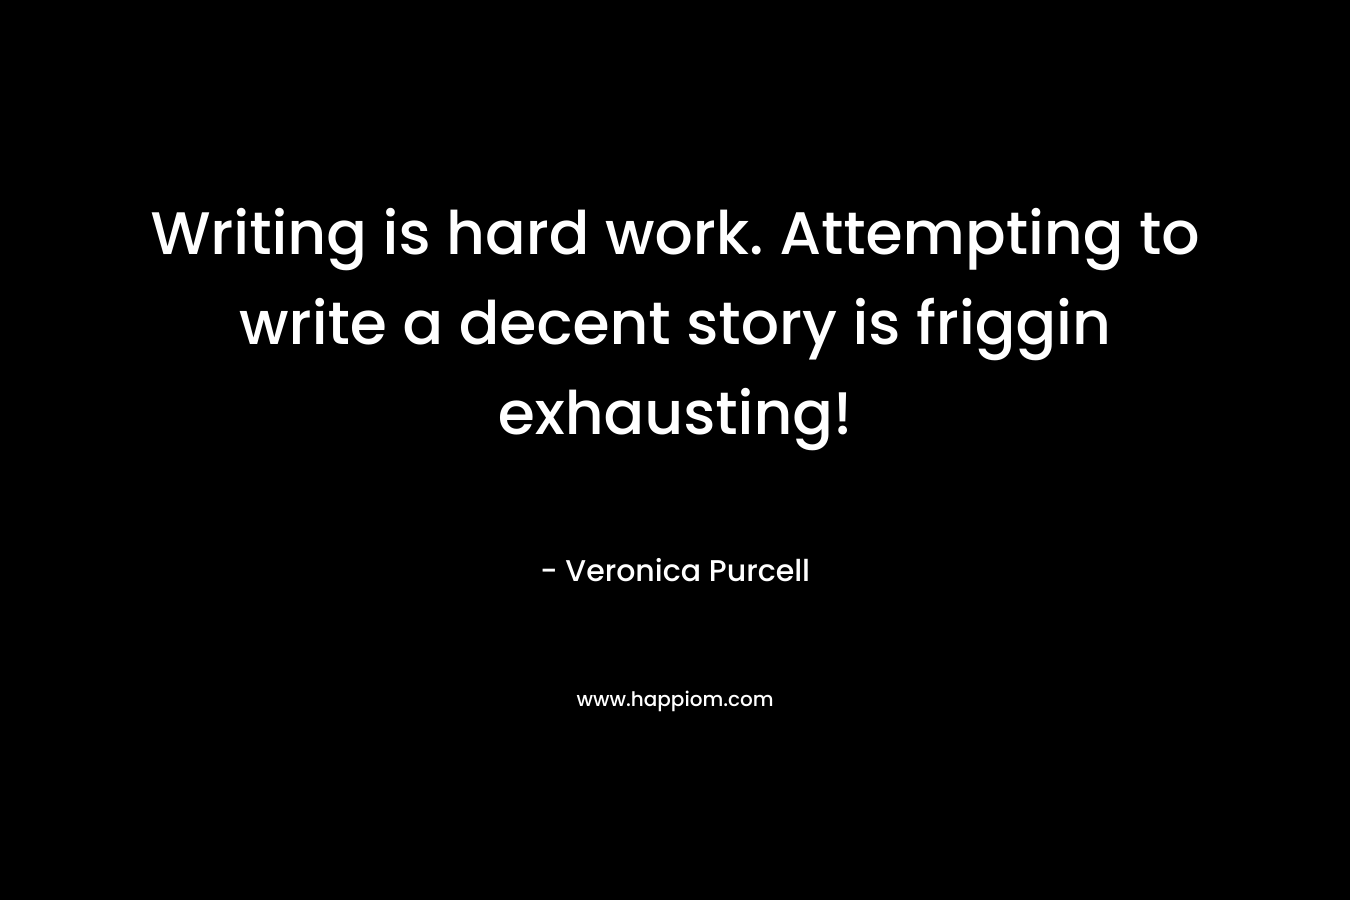 Writing is hard work. Attempting to write a decent story is friggin exhausting! – Veronica Purcell